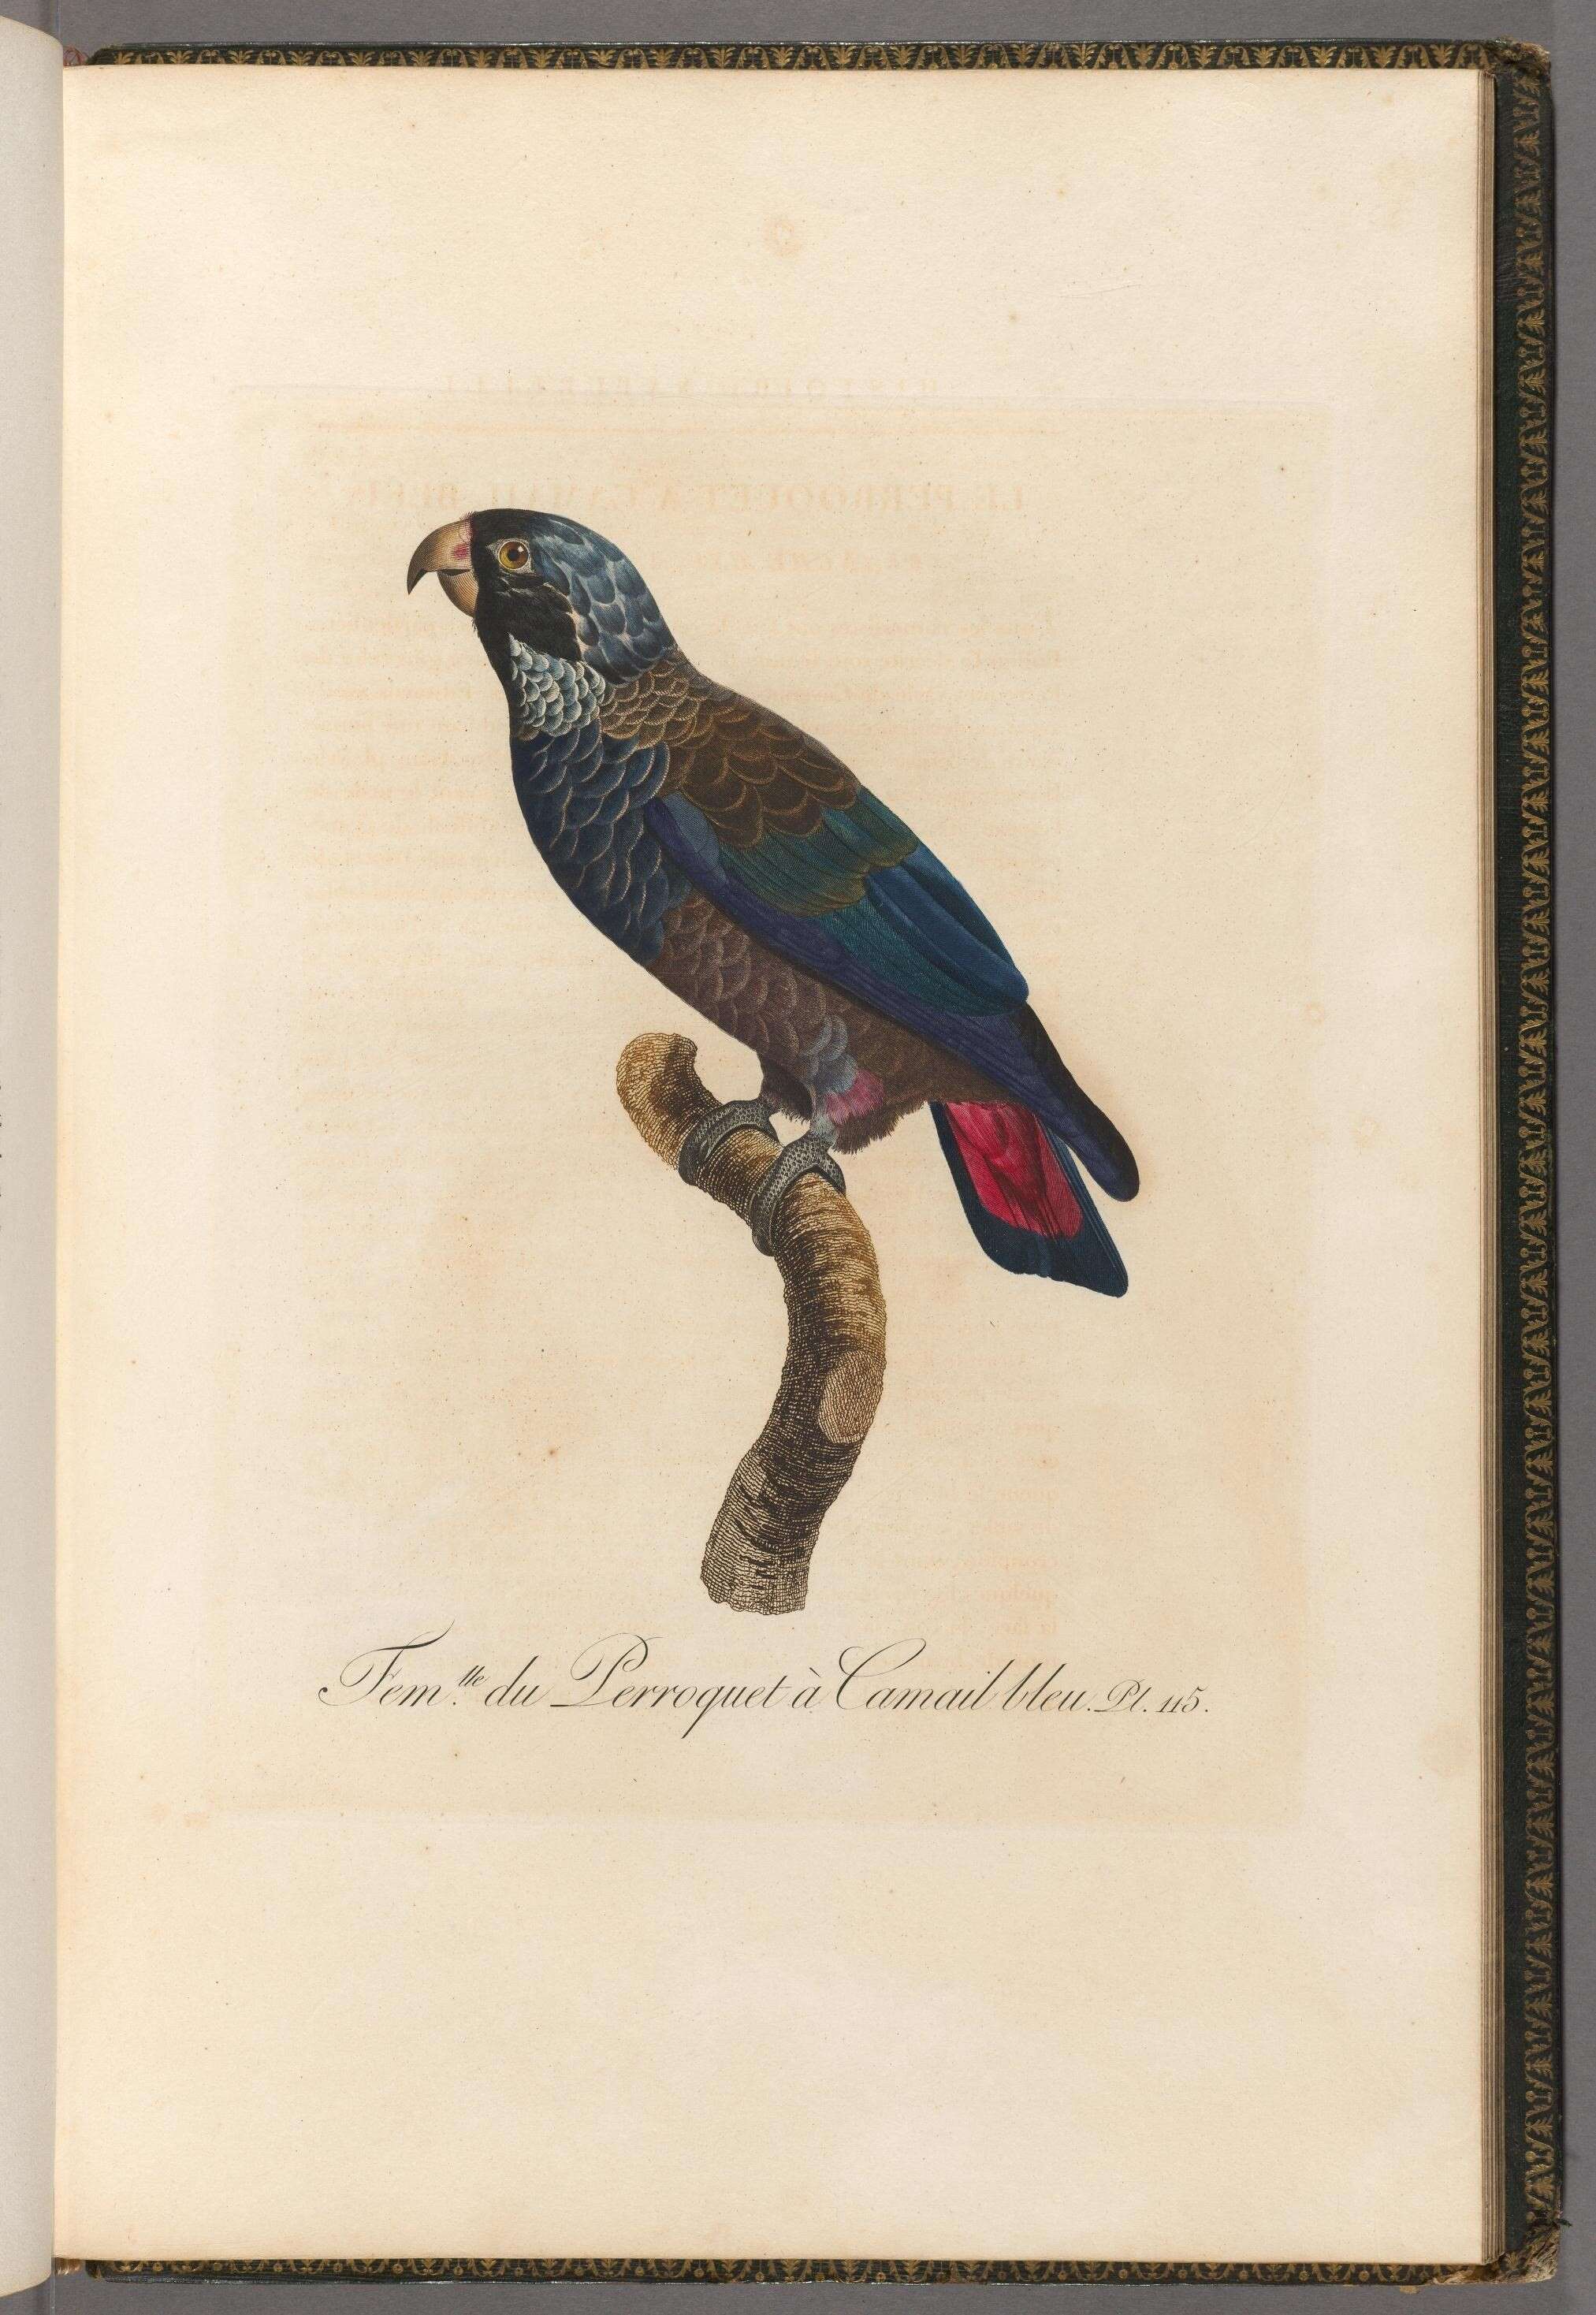 Image of Bronze-winged Parrot